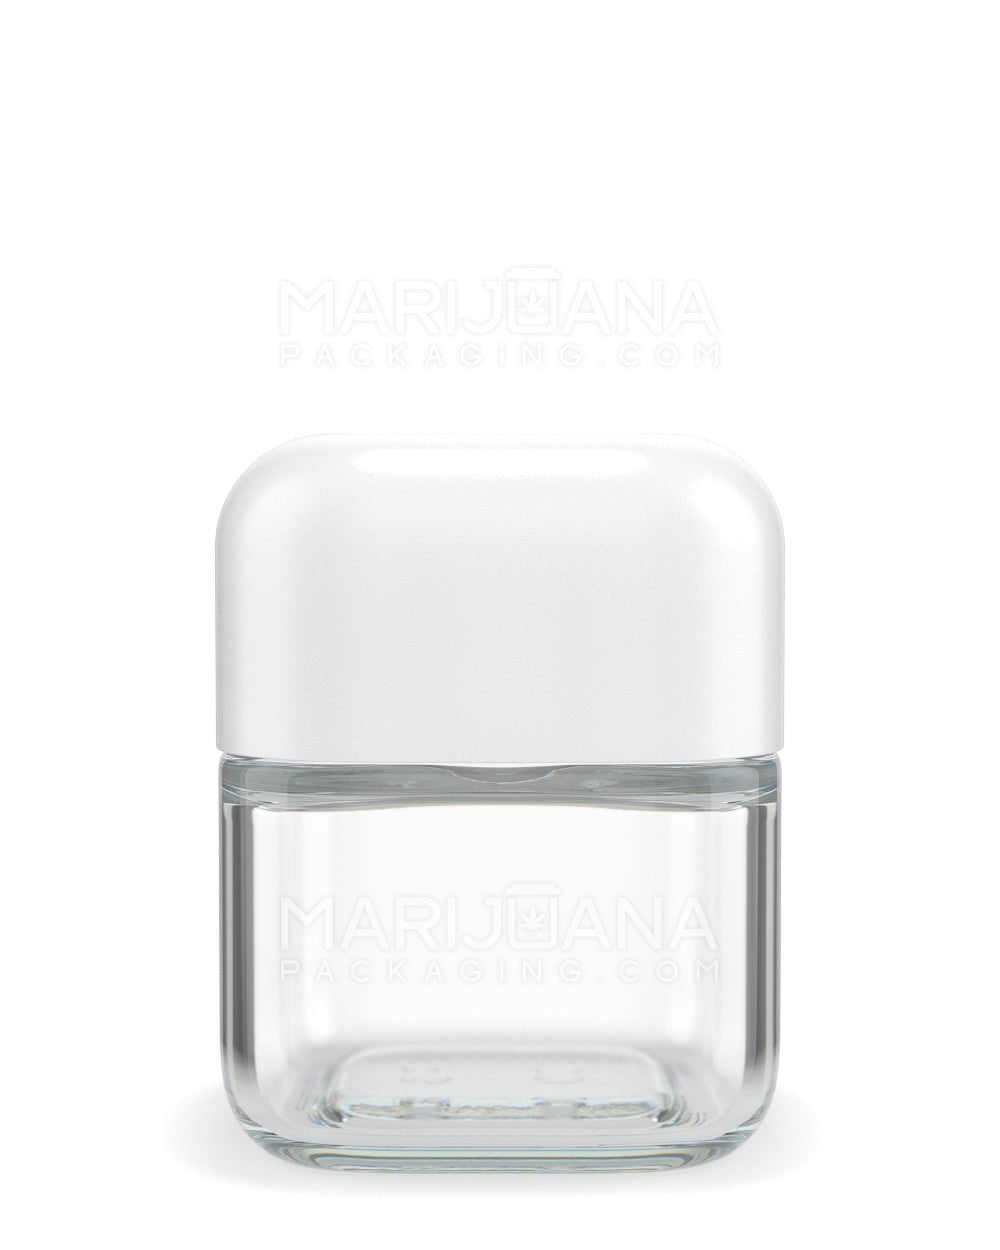 POLLEN GEAR | SoftSquare Clear Glass Jar | 46mm - 3.75oz - 72 Count - 7